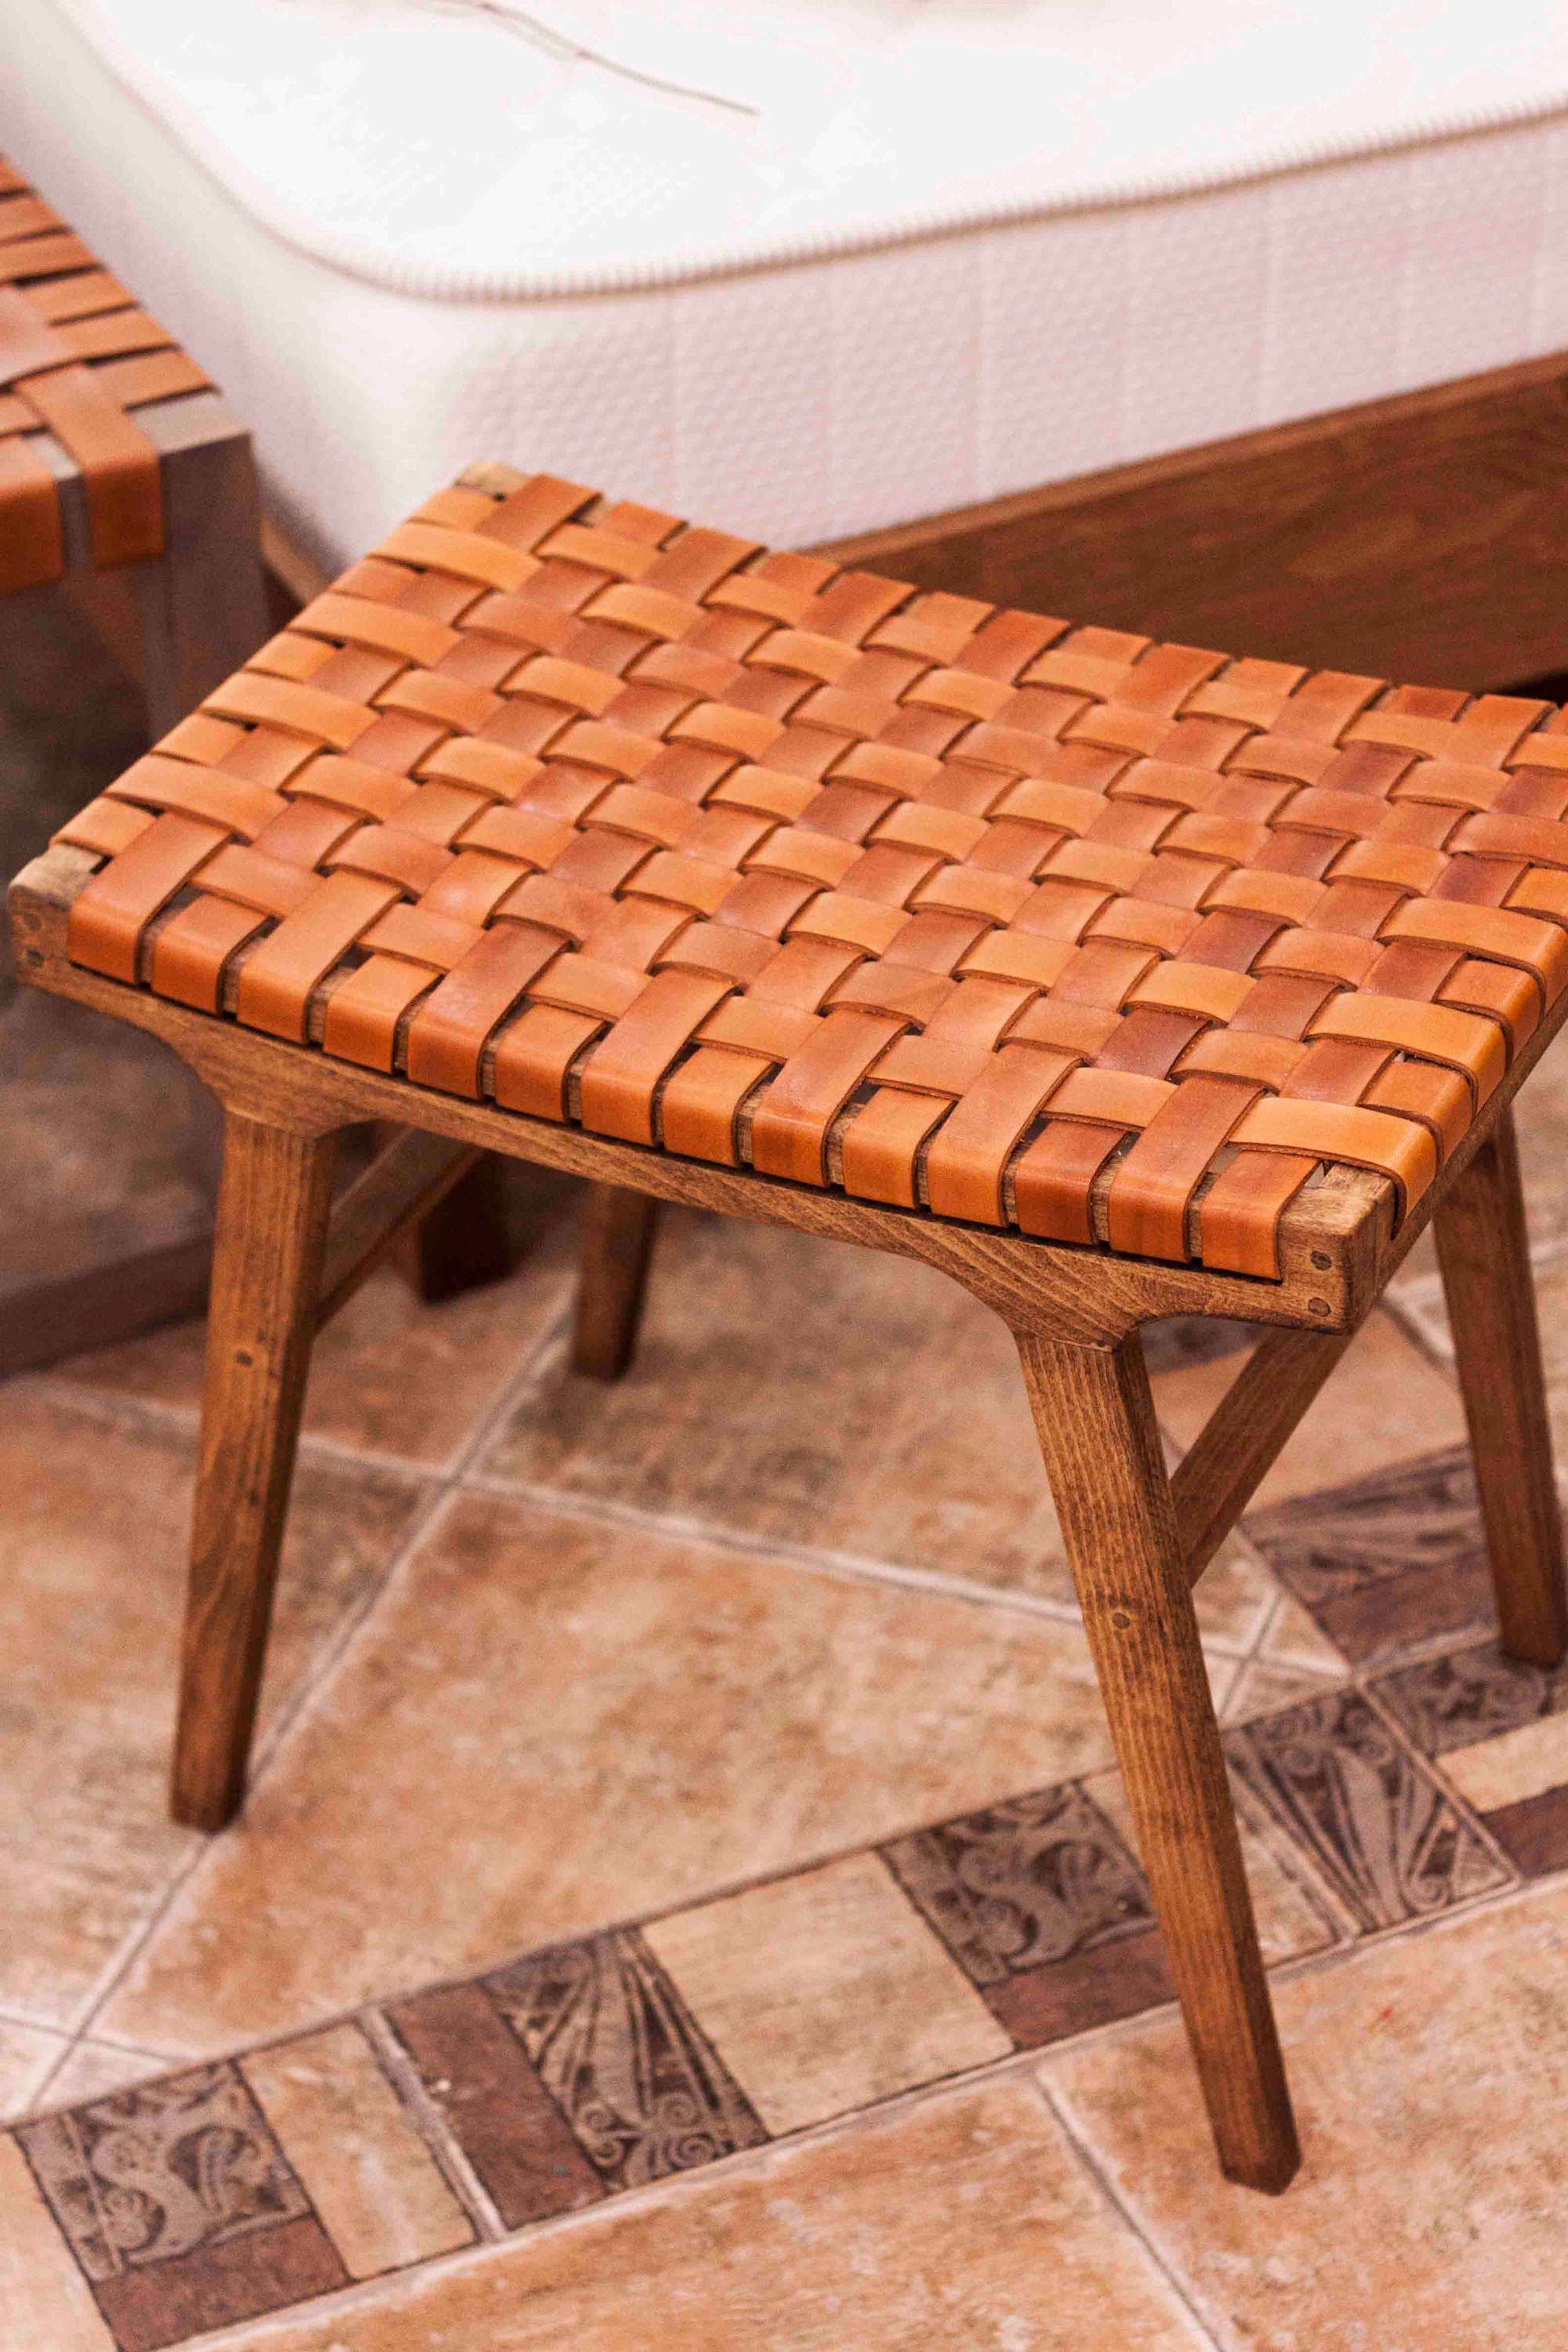 Woven Duct Tape Stool - Country Design Style